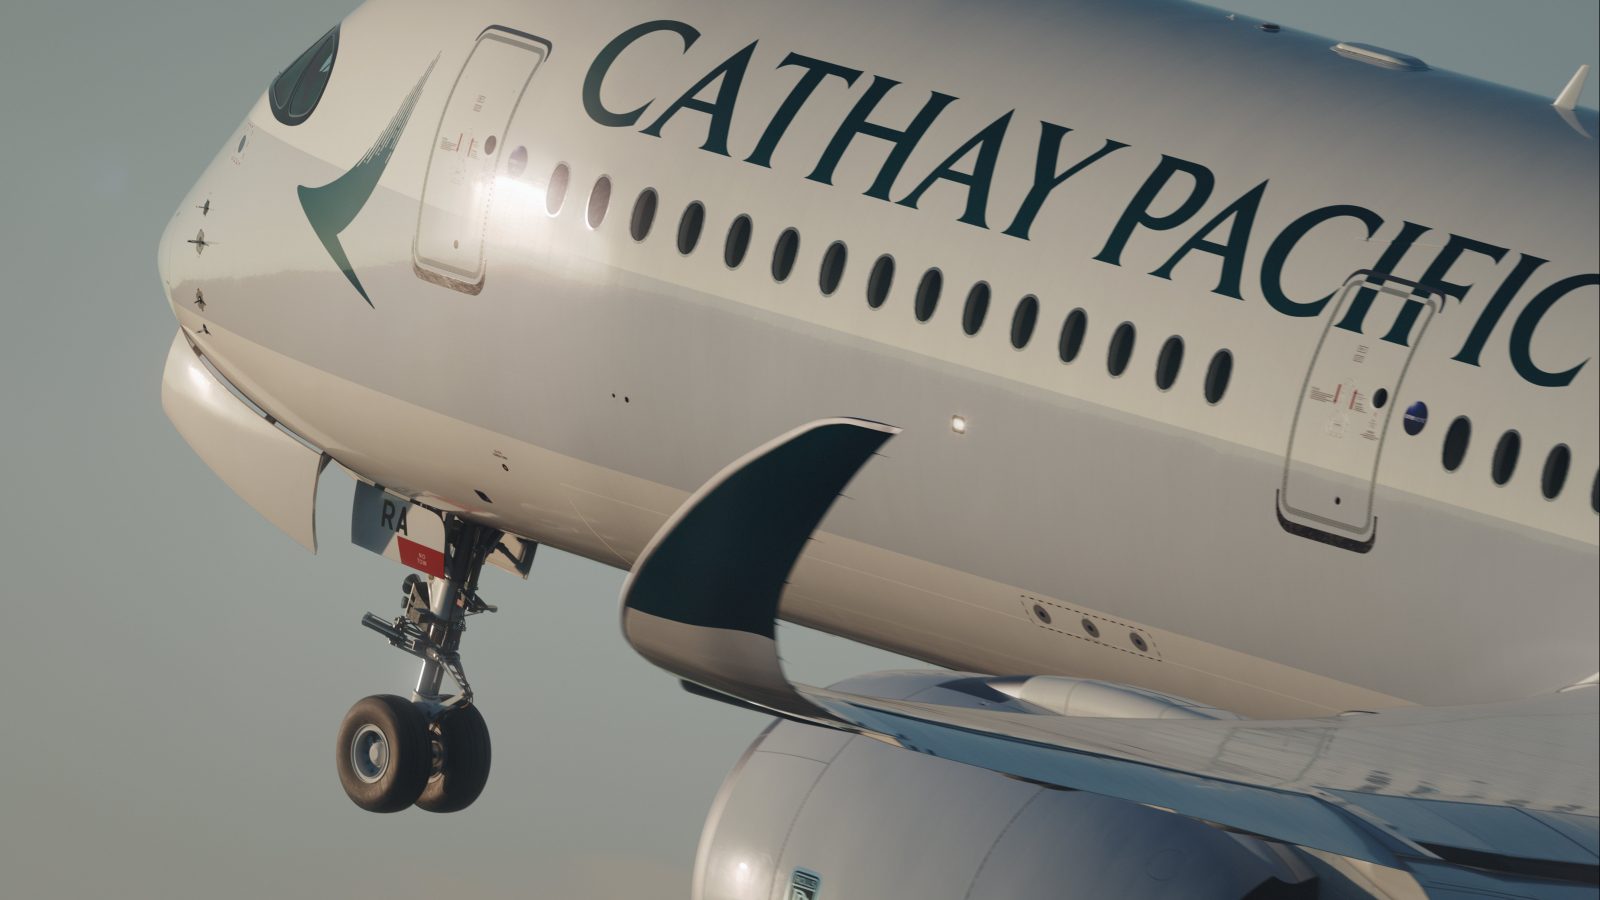 China Imposes Sanctions On Cathay Pacific Pilots and Cabin Crew Involved in Anti-ELAB Movement